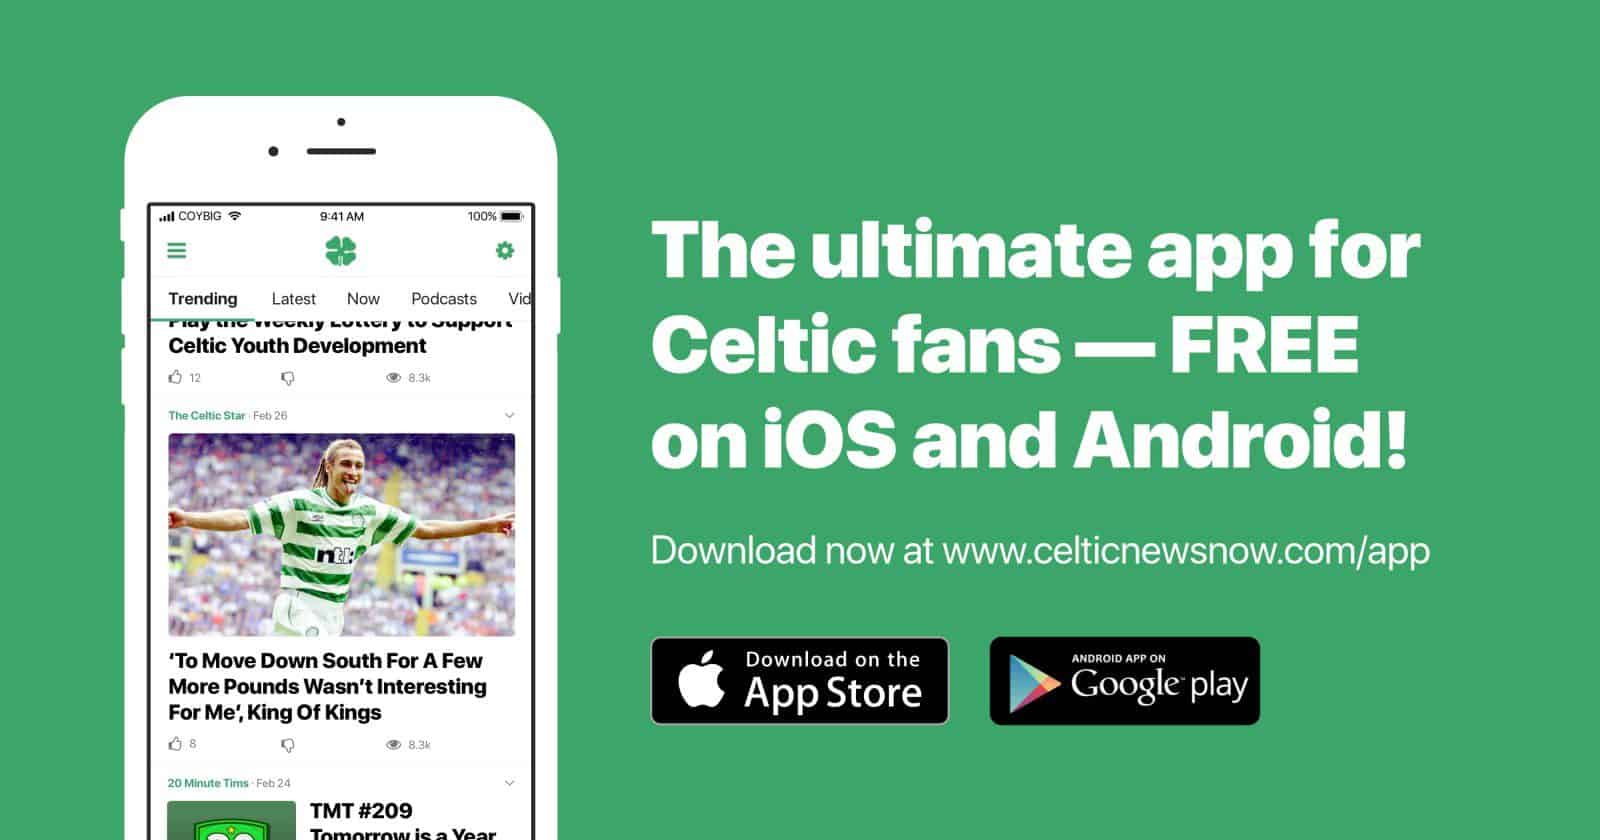 How To Watch Celtic TV In The UK?